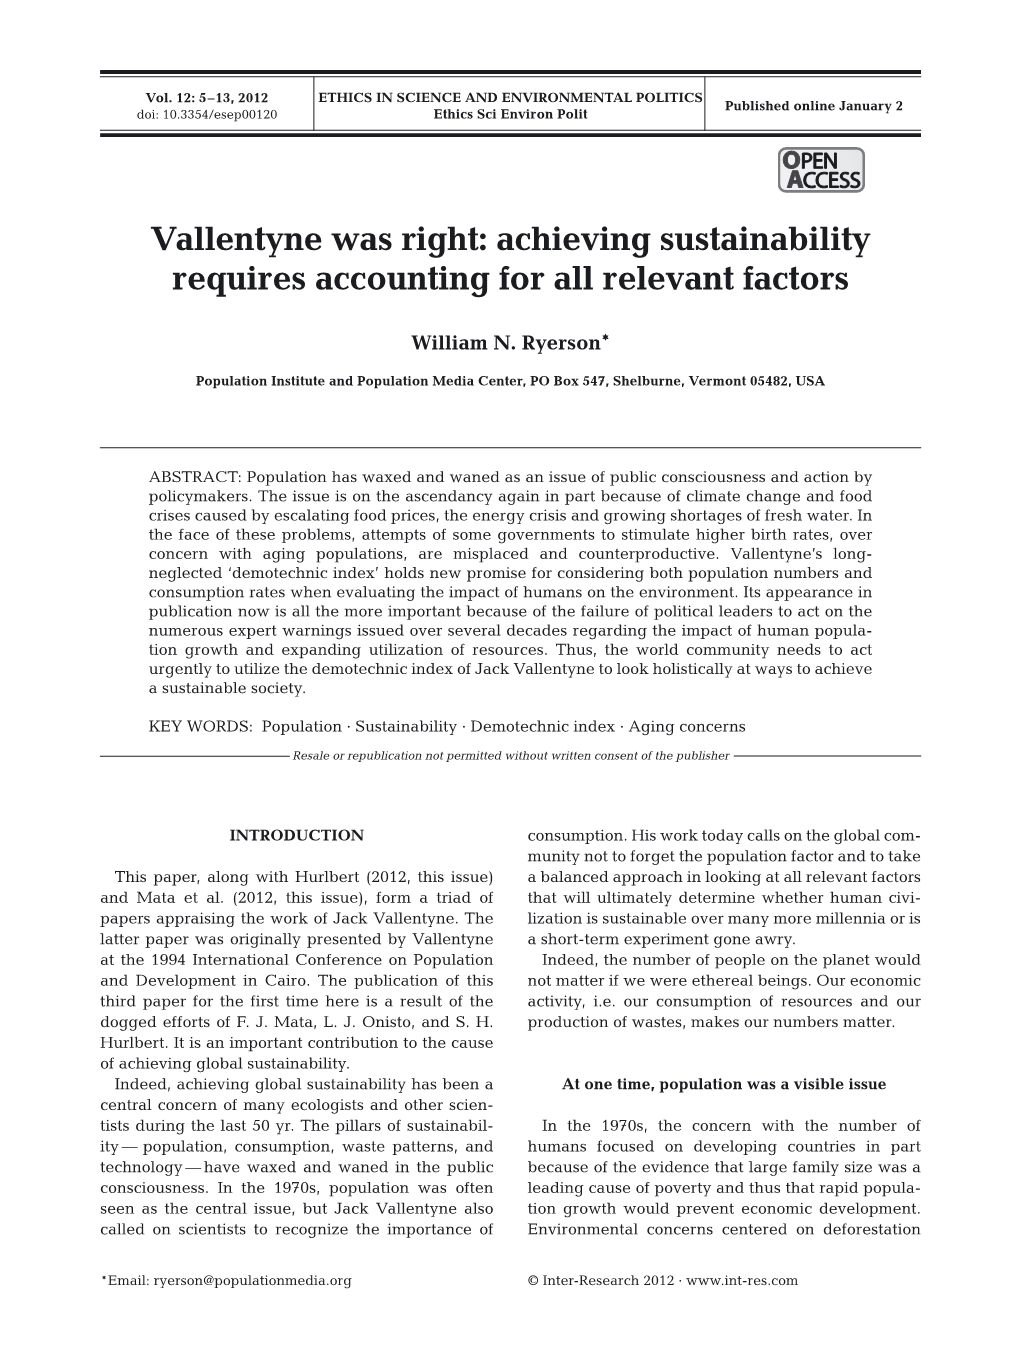 Vallentyne Was Right: Achieving Sustainability Requires Accounting for All Relevant Factors